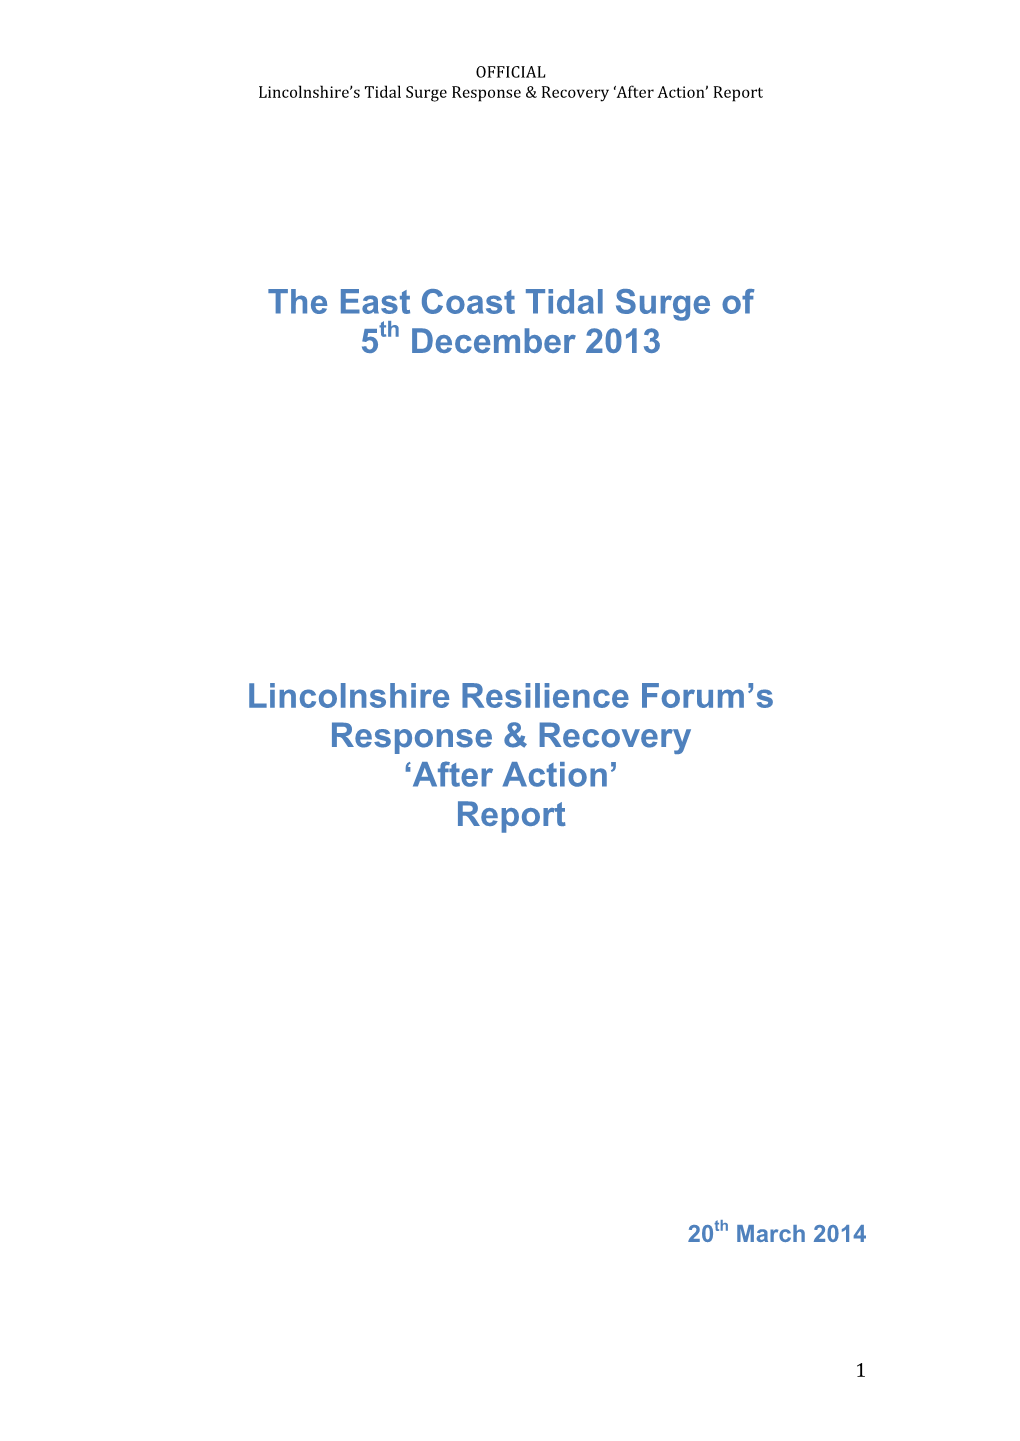 The East Coast Tidal Surge of 5 December 2013 Lincolnshire